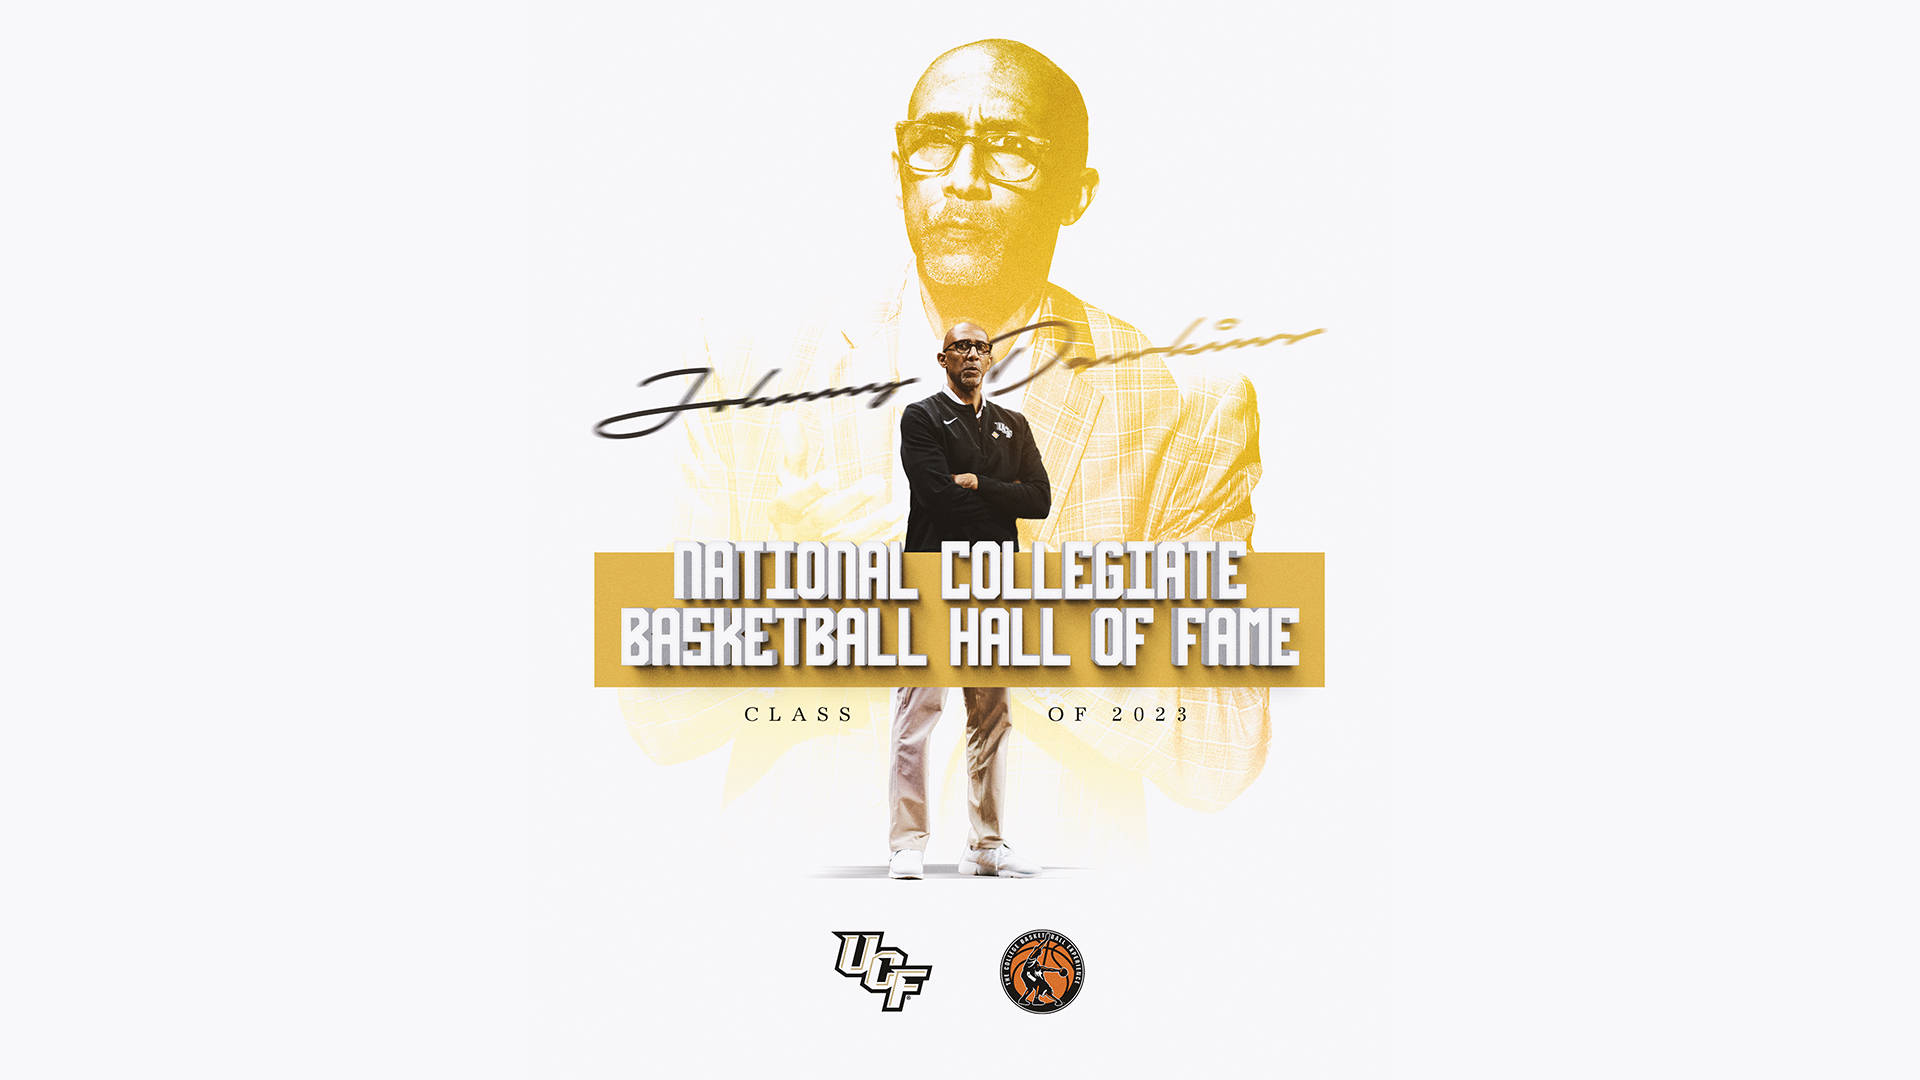 Mike Krzyzewski, Johnny Dawkins and Tyler Hansbrough inducted into National  Collegiate Basketball Hall of Fame 